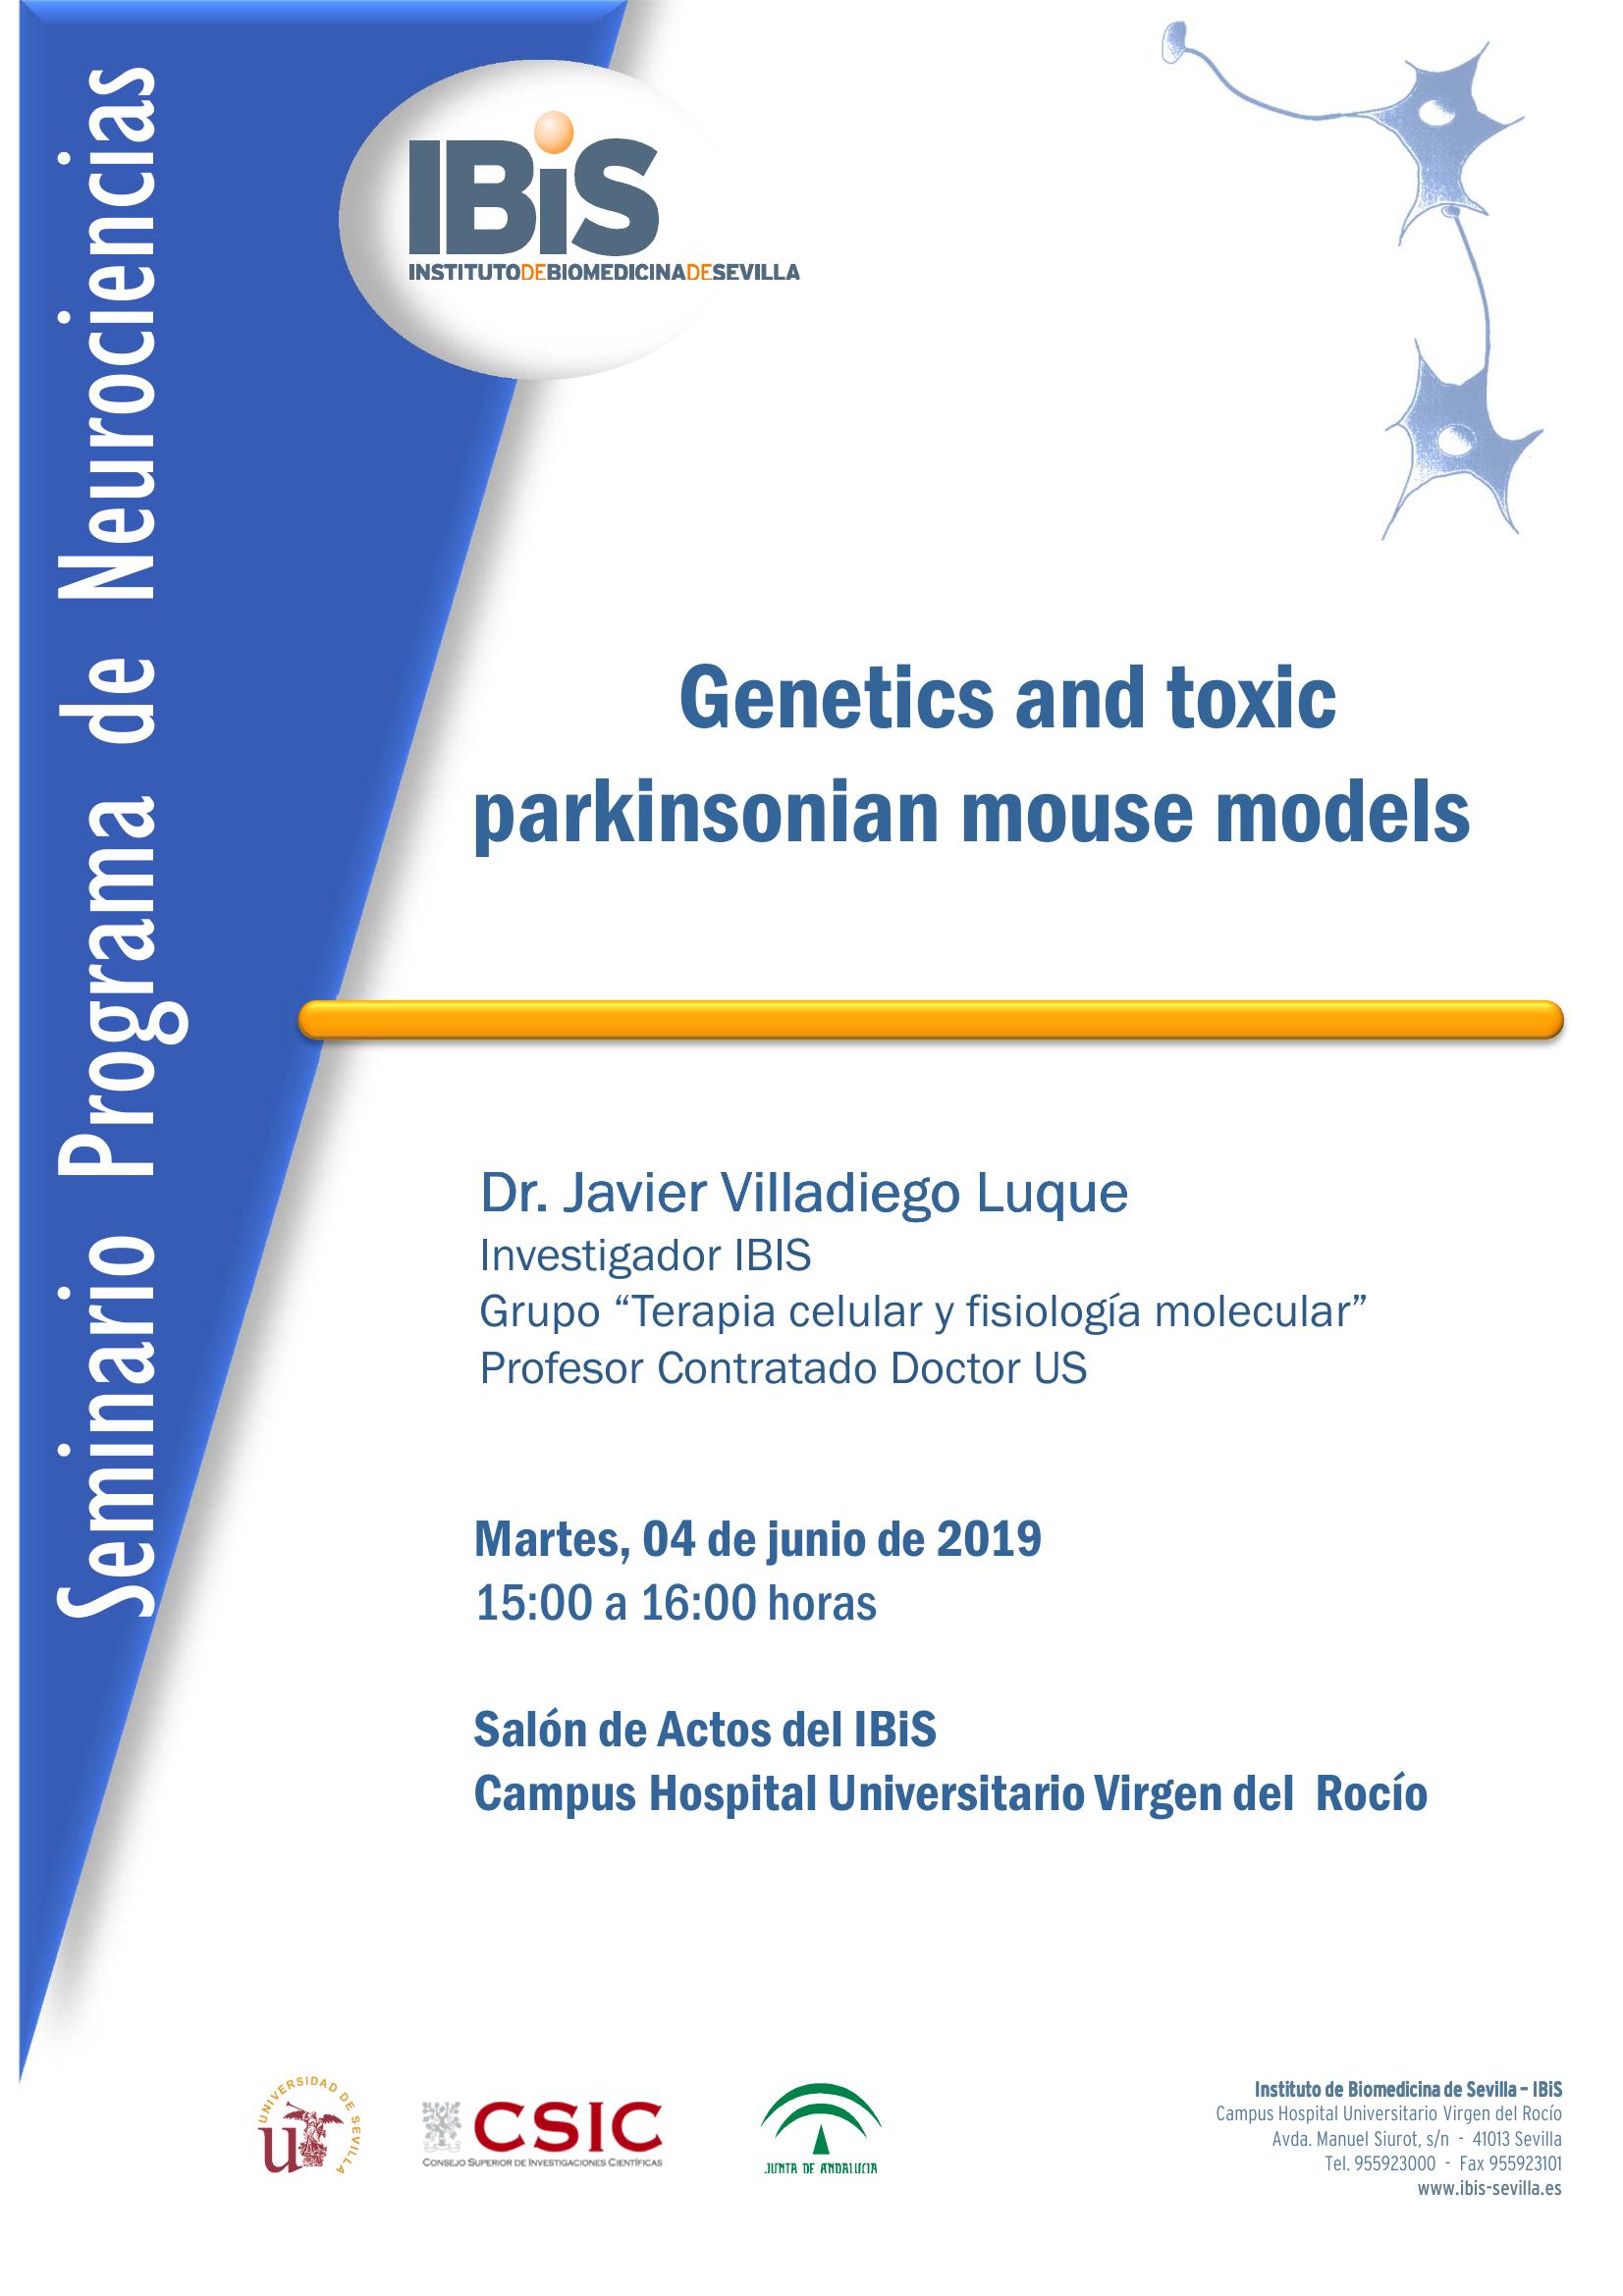 Poster: Genetics and toxic parkinsonian mouse models